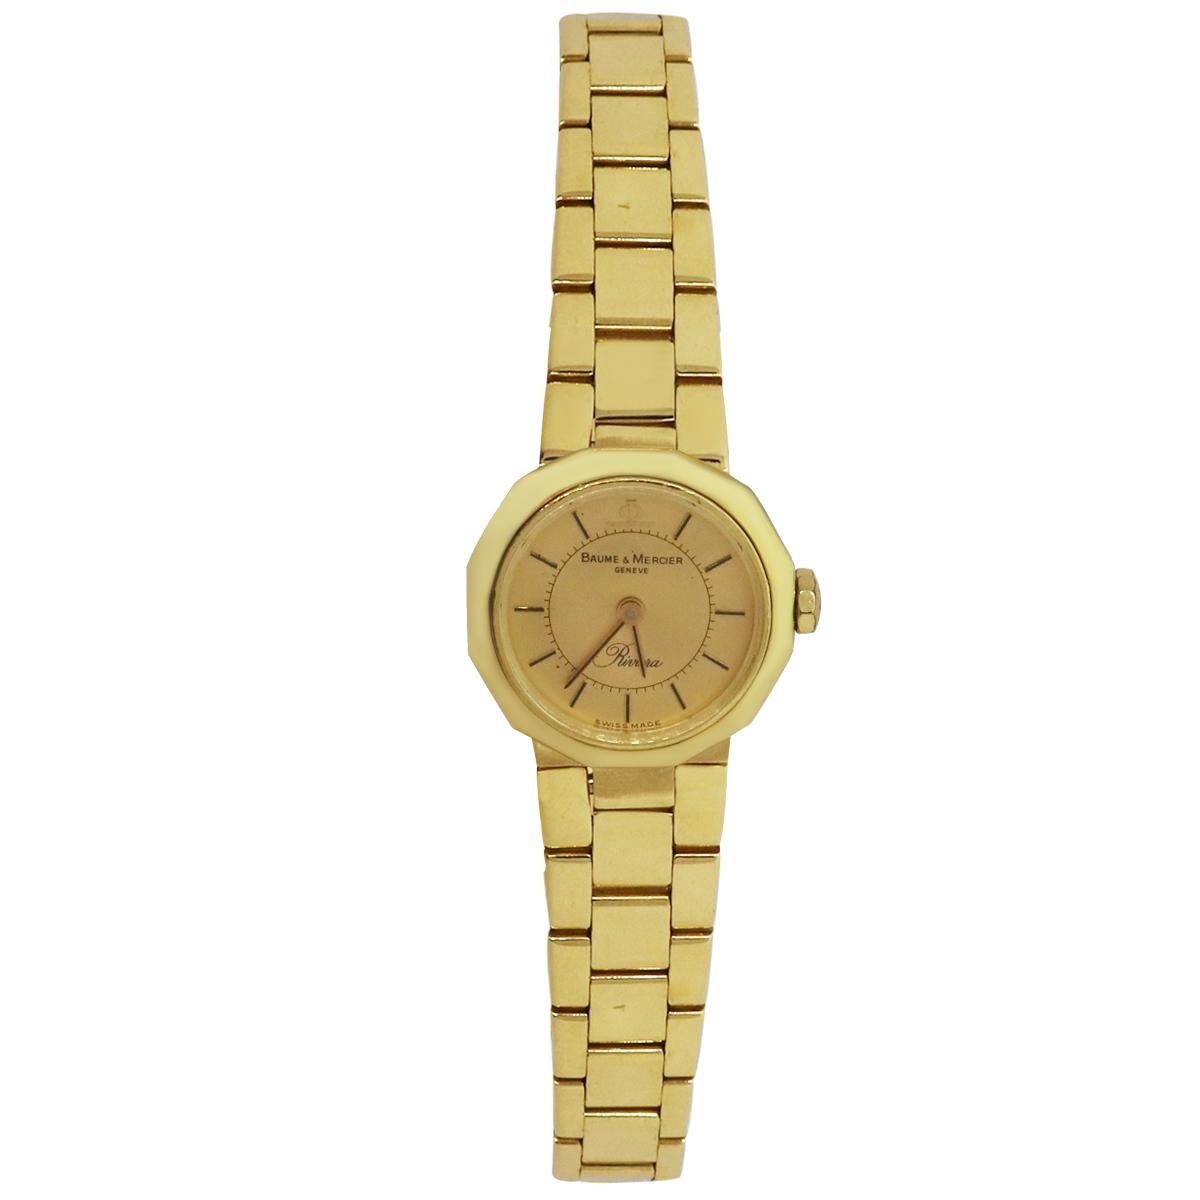 Brand: Baume & Mercier
Model: Riviera
Material: 18k Yellow Gold
Dial: Champagne dial with yellow hands and markers
Bezel: Fixed smooth 18k yellow gold bezel
Case Measurements: 24mm
Bracelet: Yellow gold link bracelet
Clasp: Fold over lock yellow